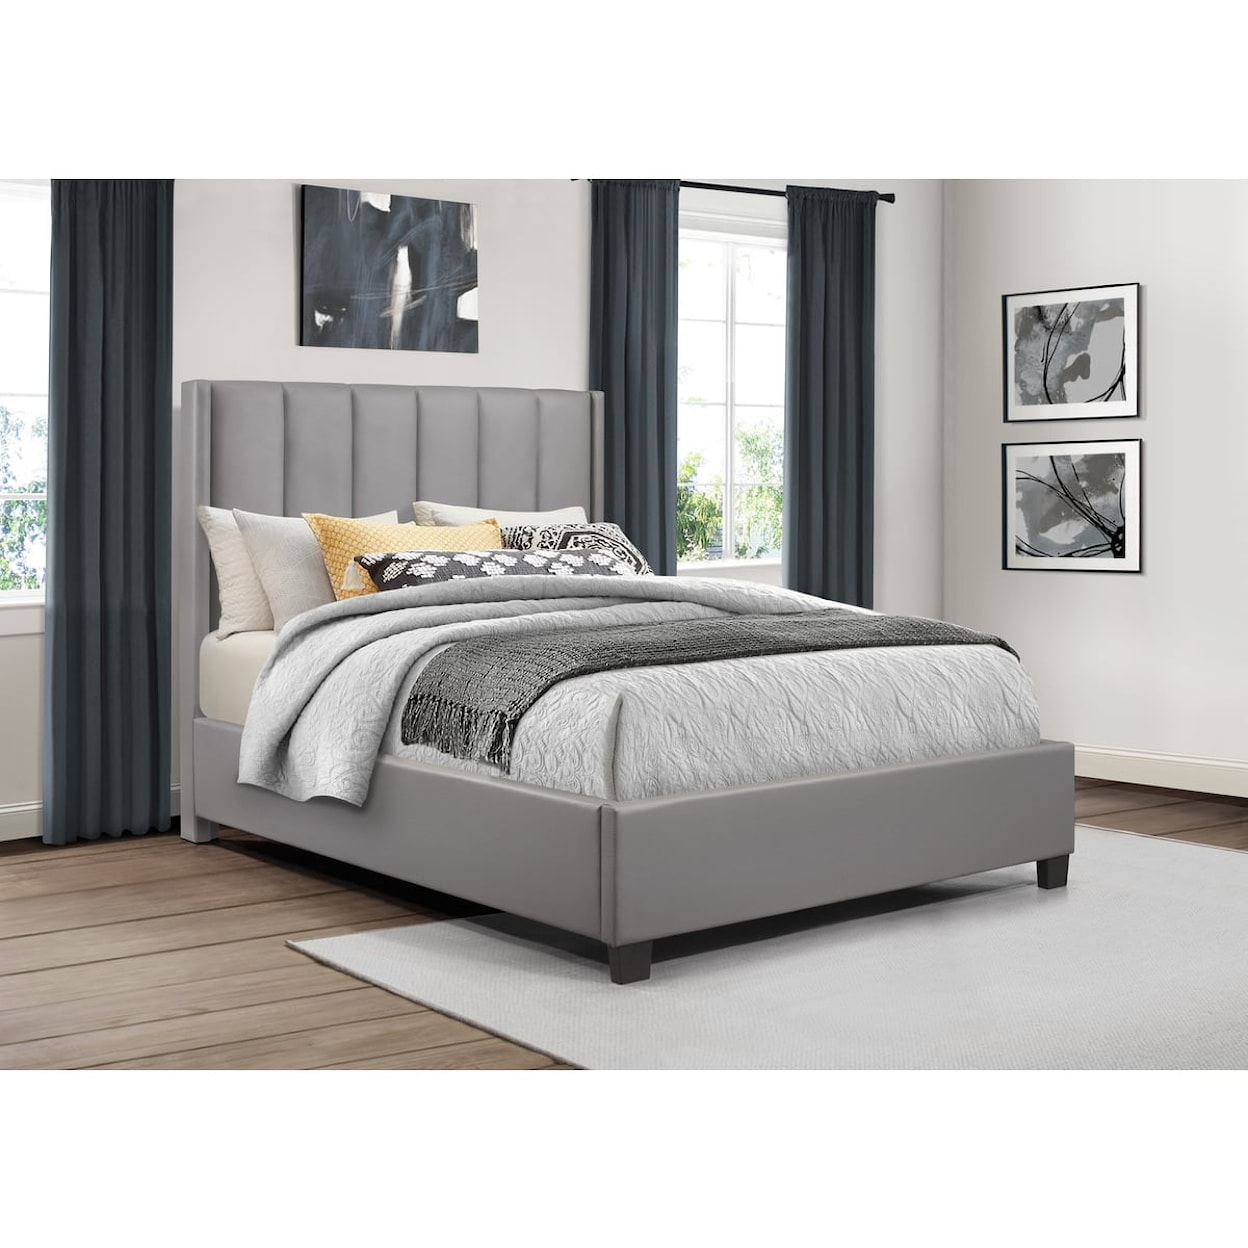 Homelegance Anson Queen  Bed